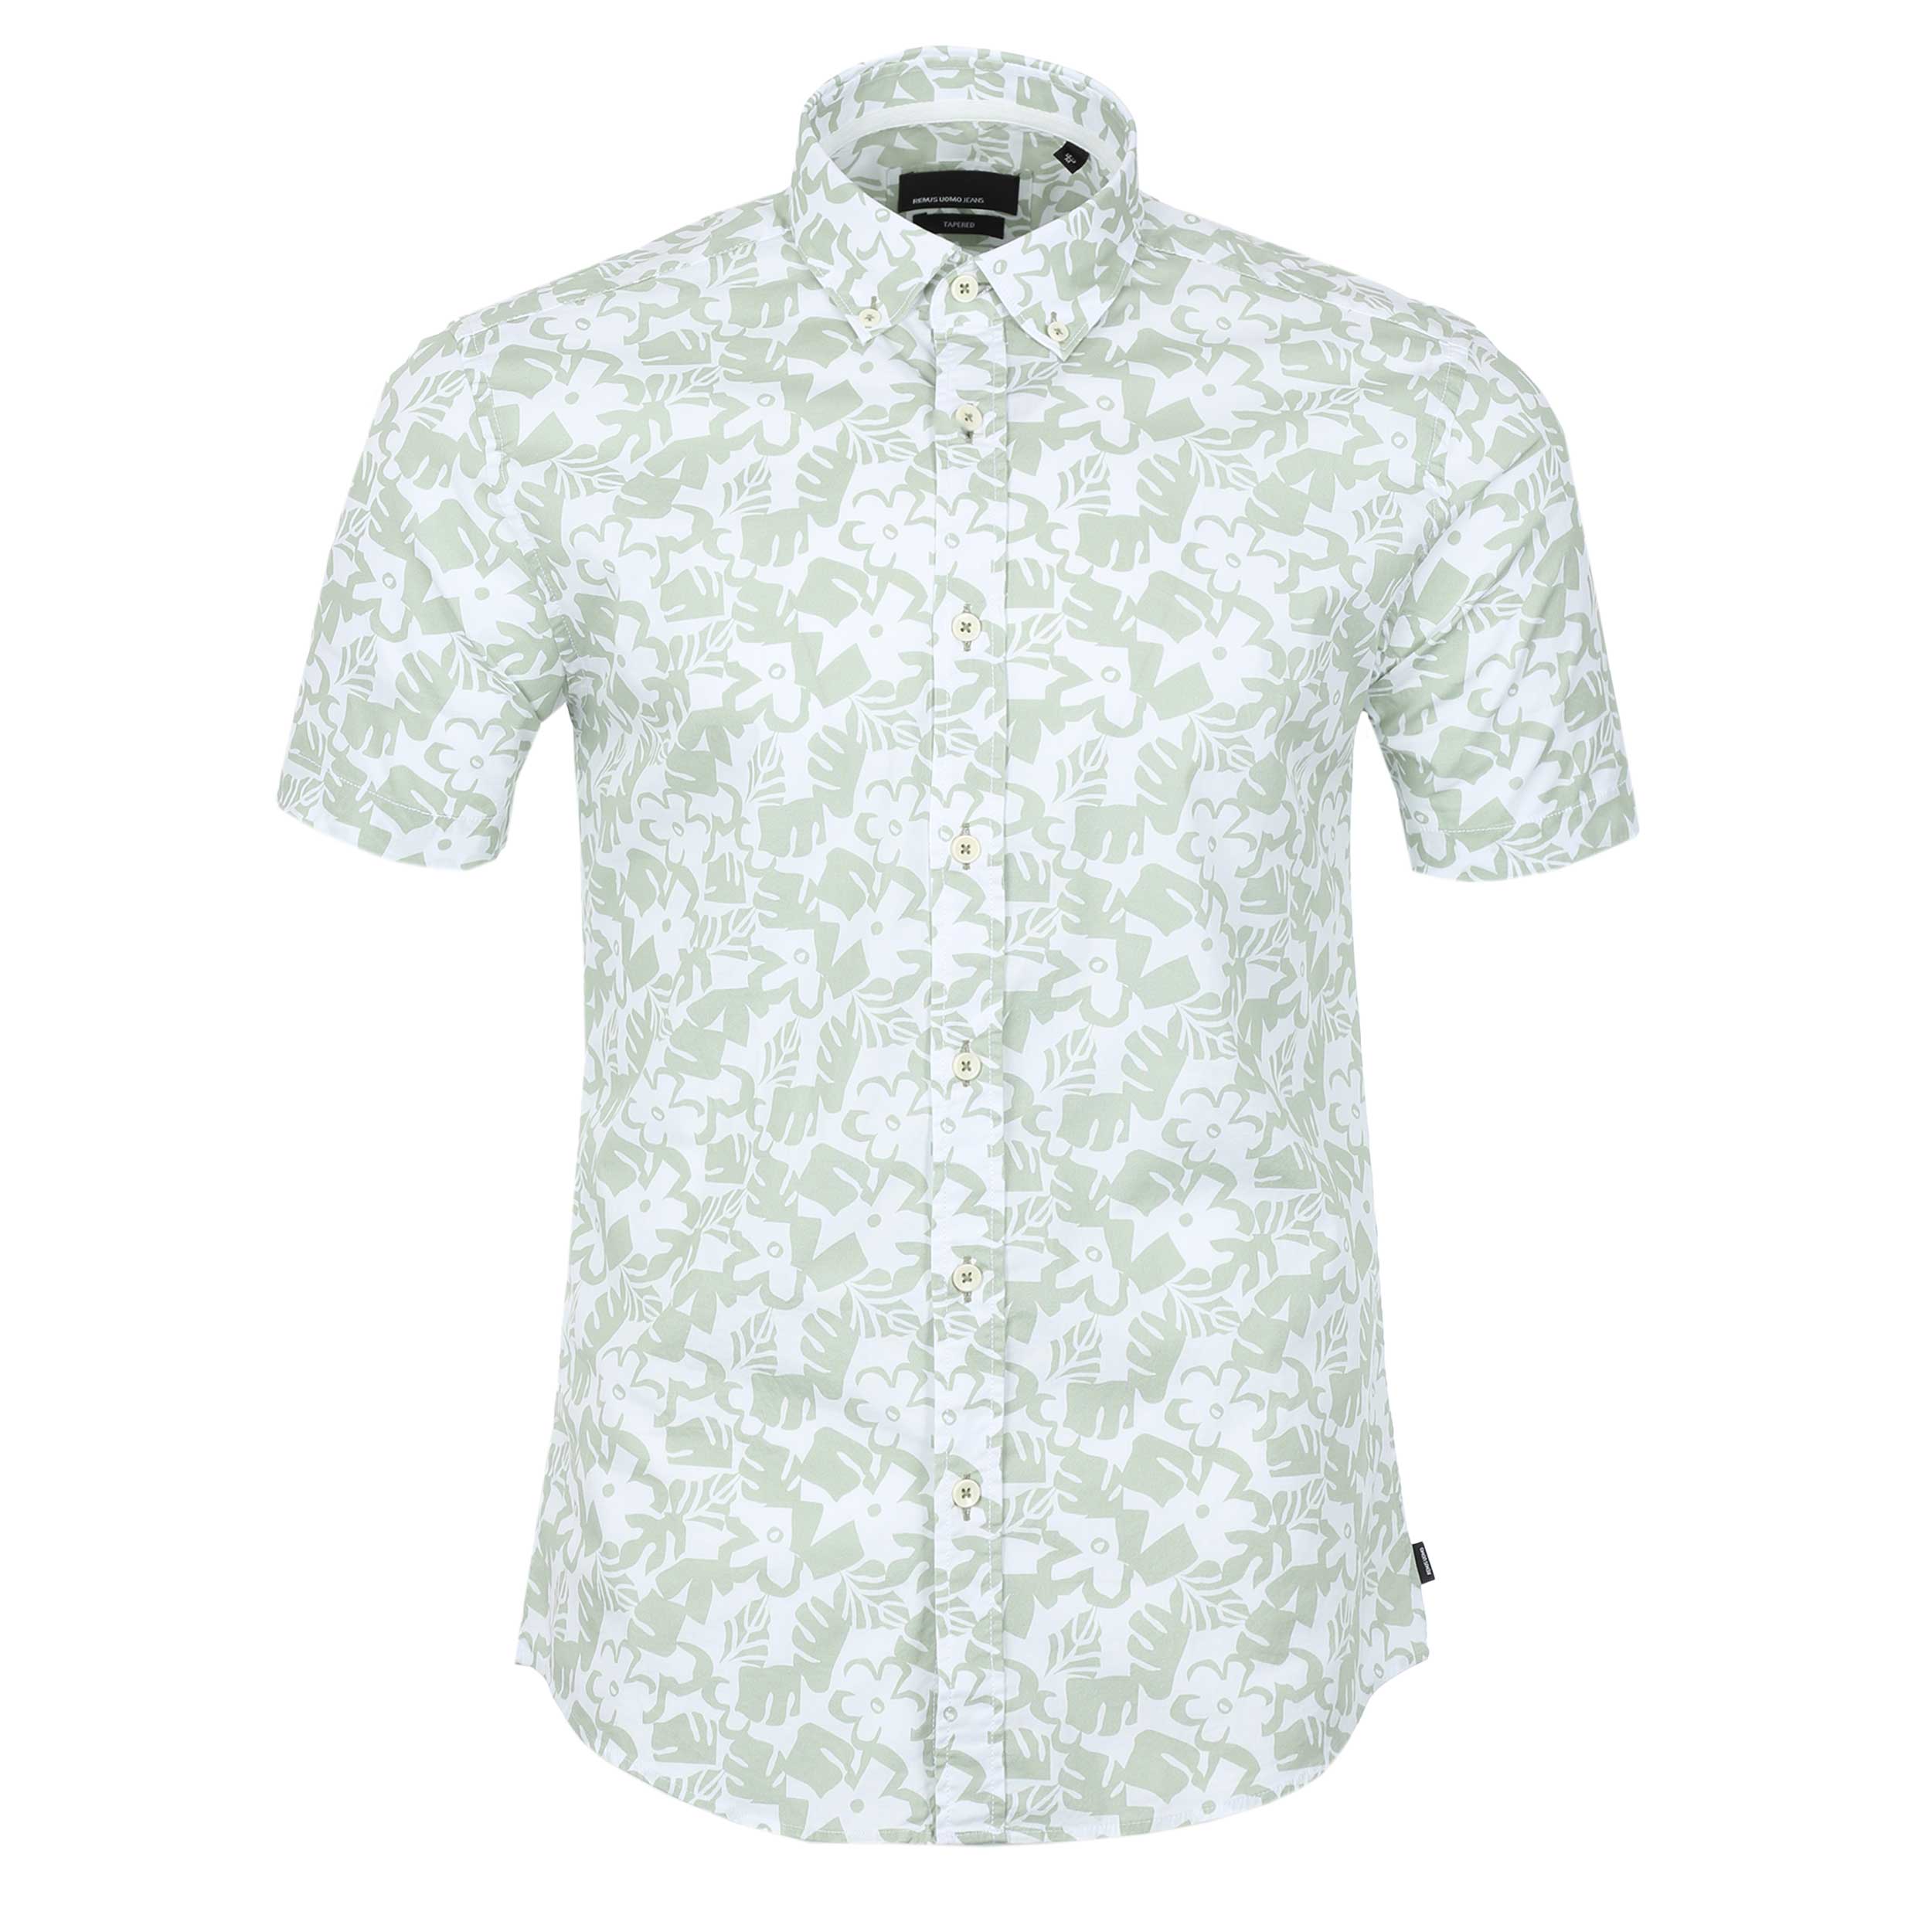 Remus Uomo Leaf Floral Print Short Sleeve Shirt in Mint White